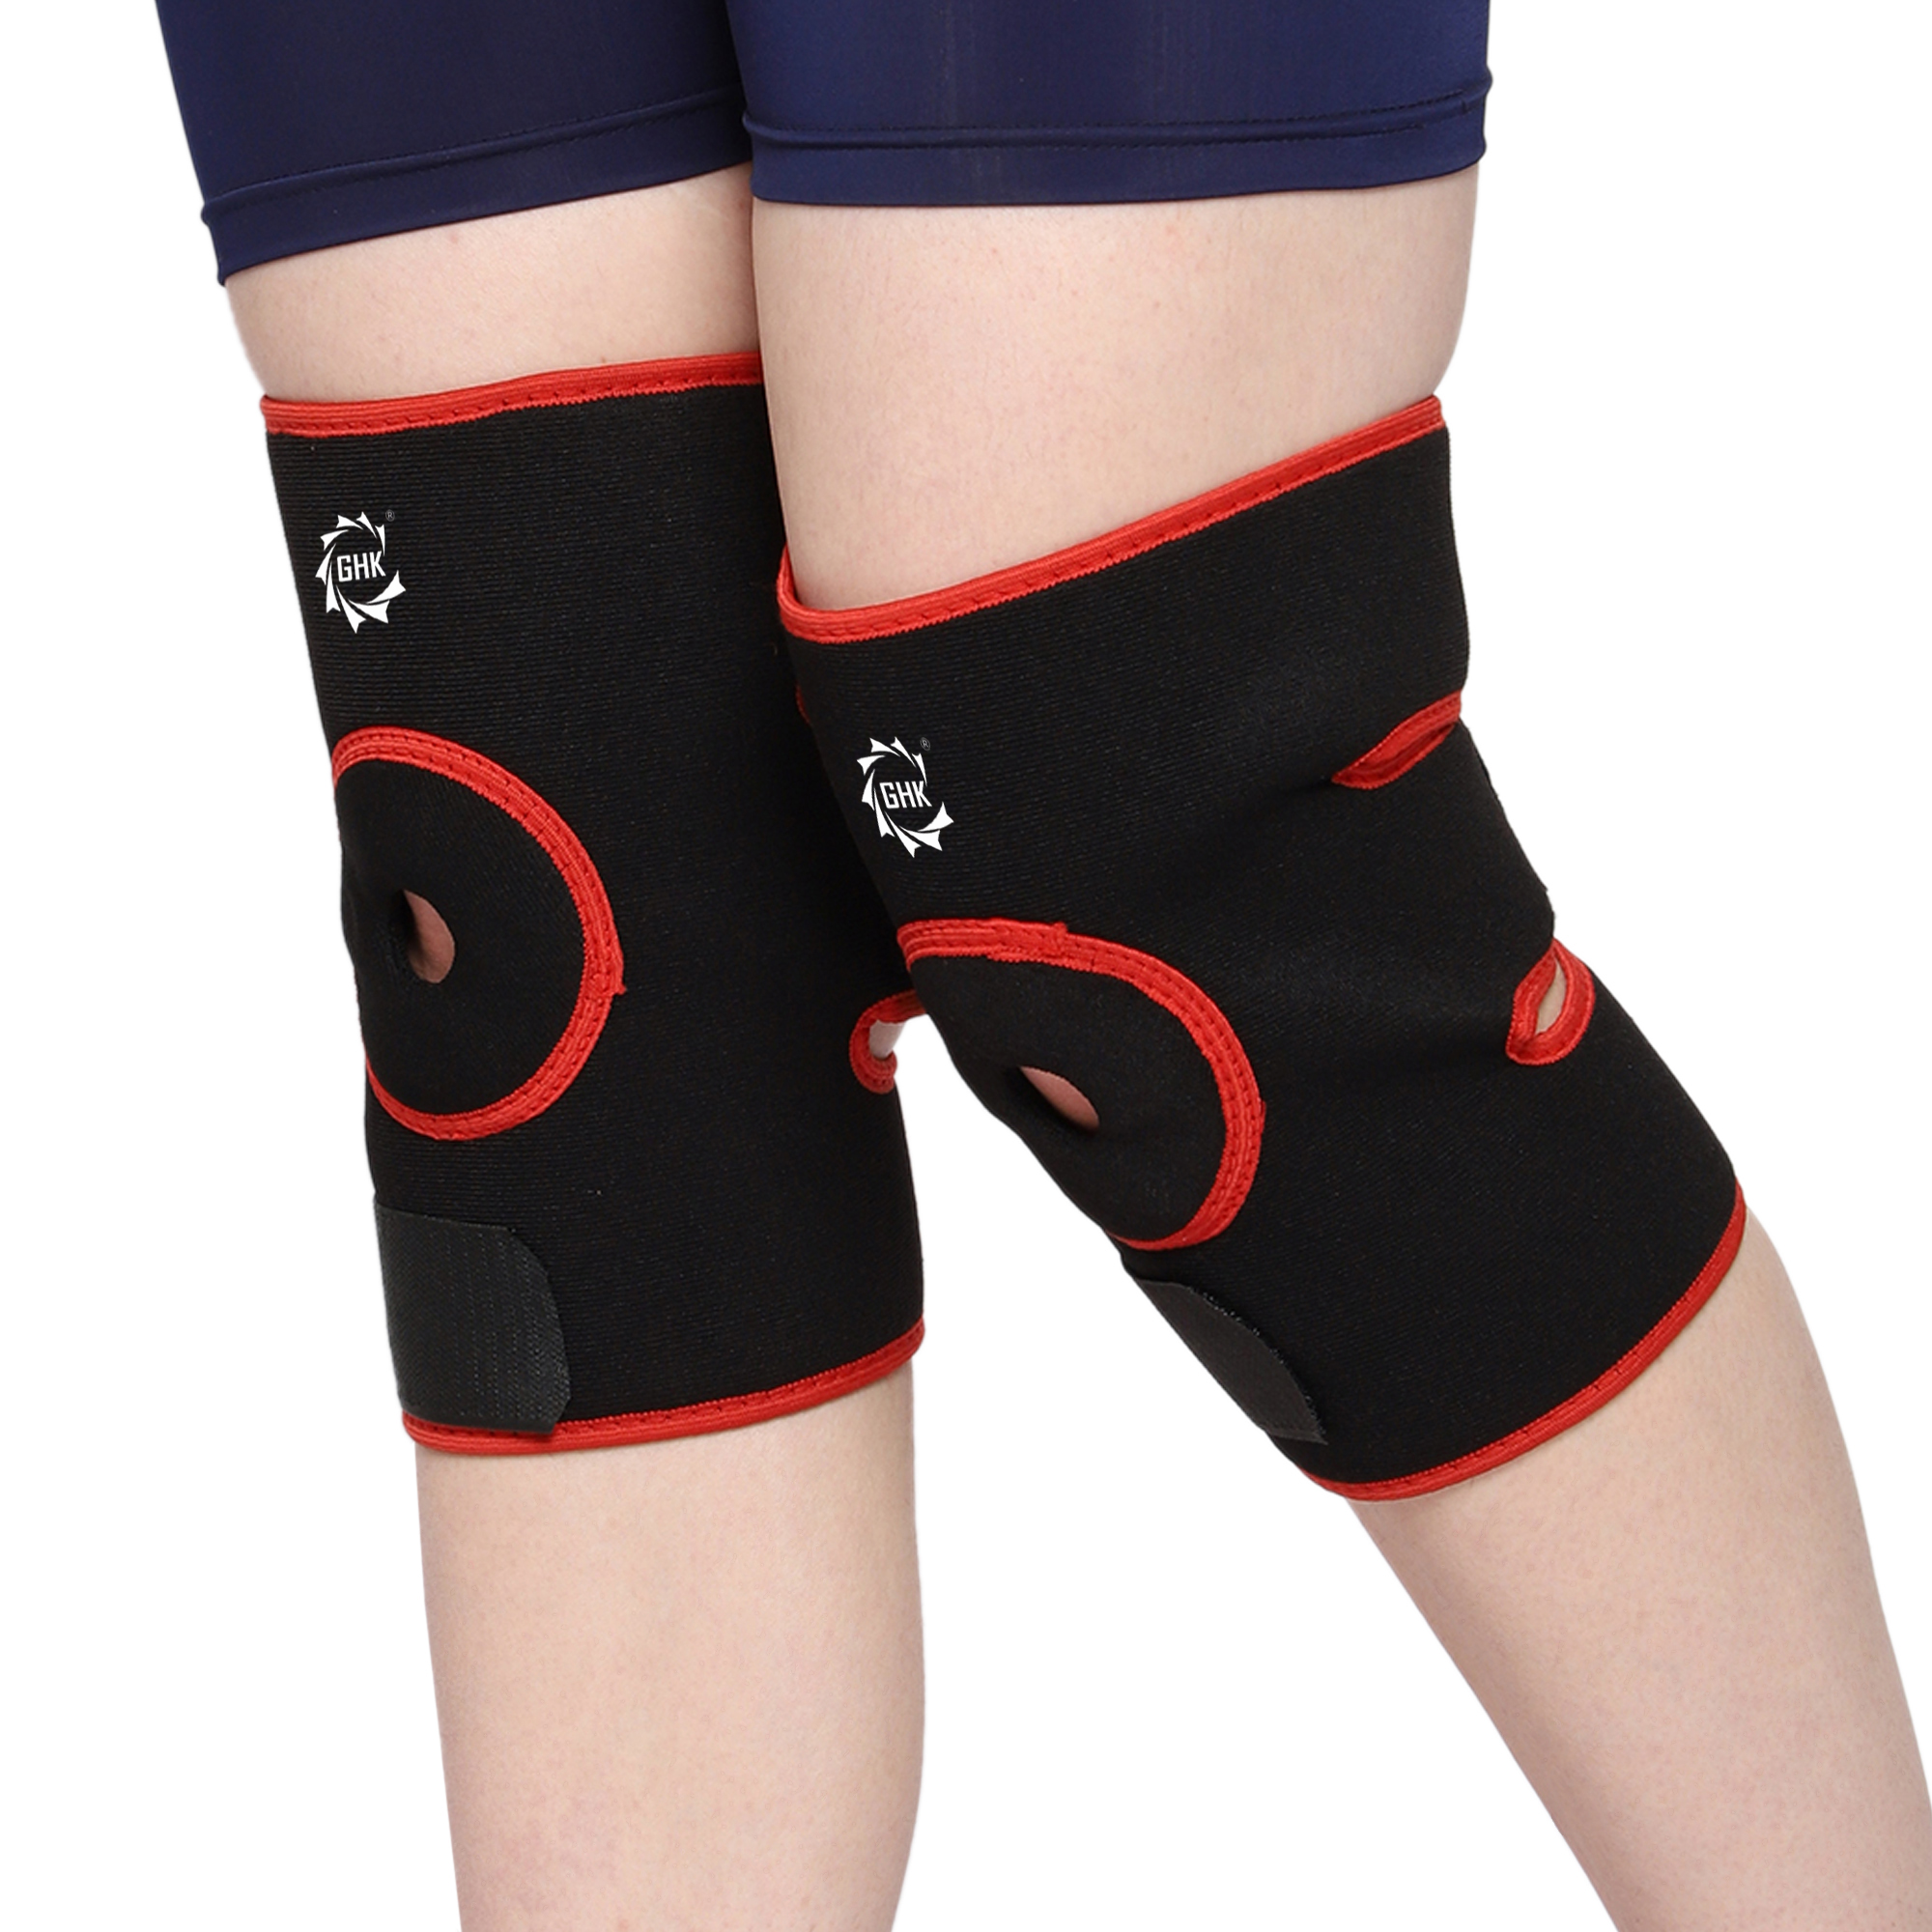 GHK S7 Compression Stocking Above Knee for Support Pressure